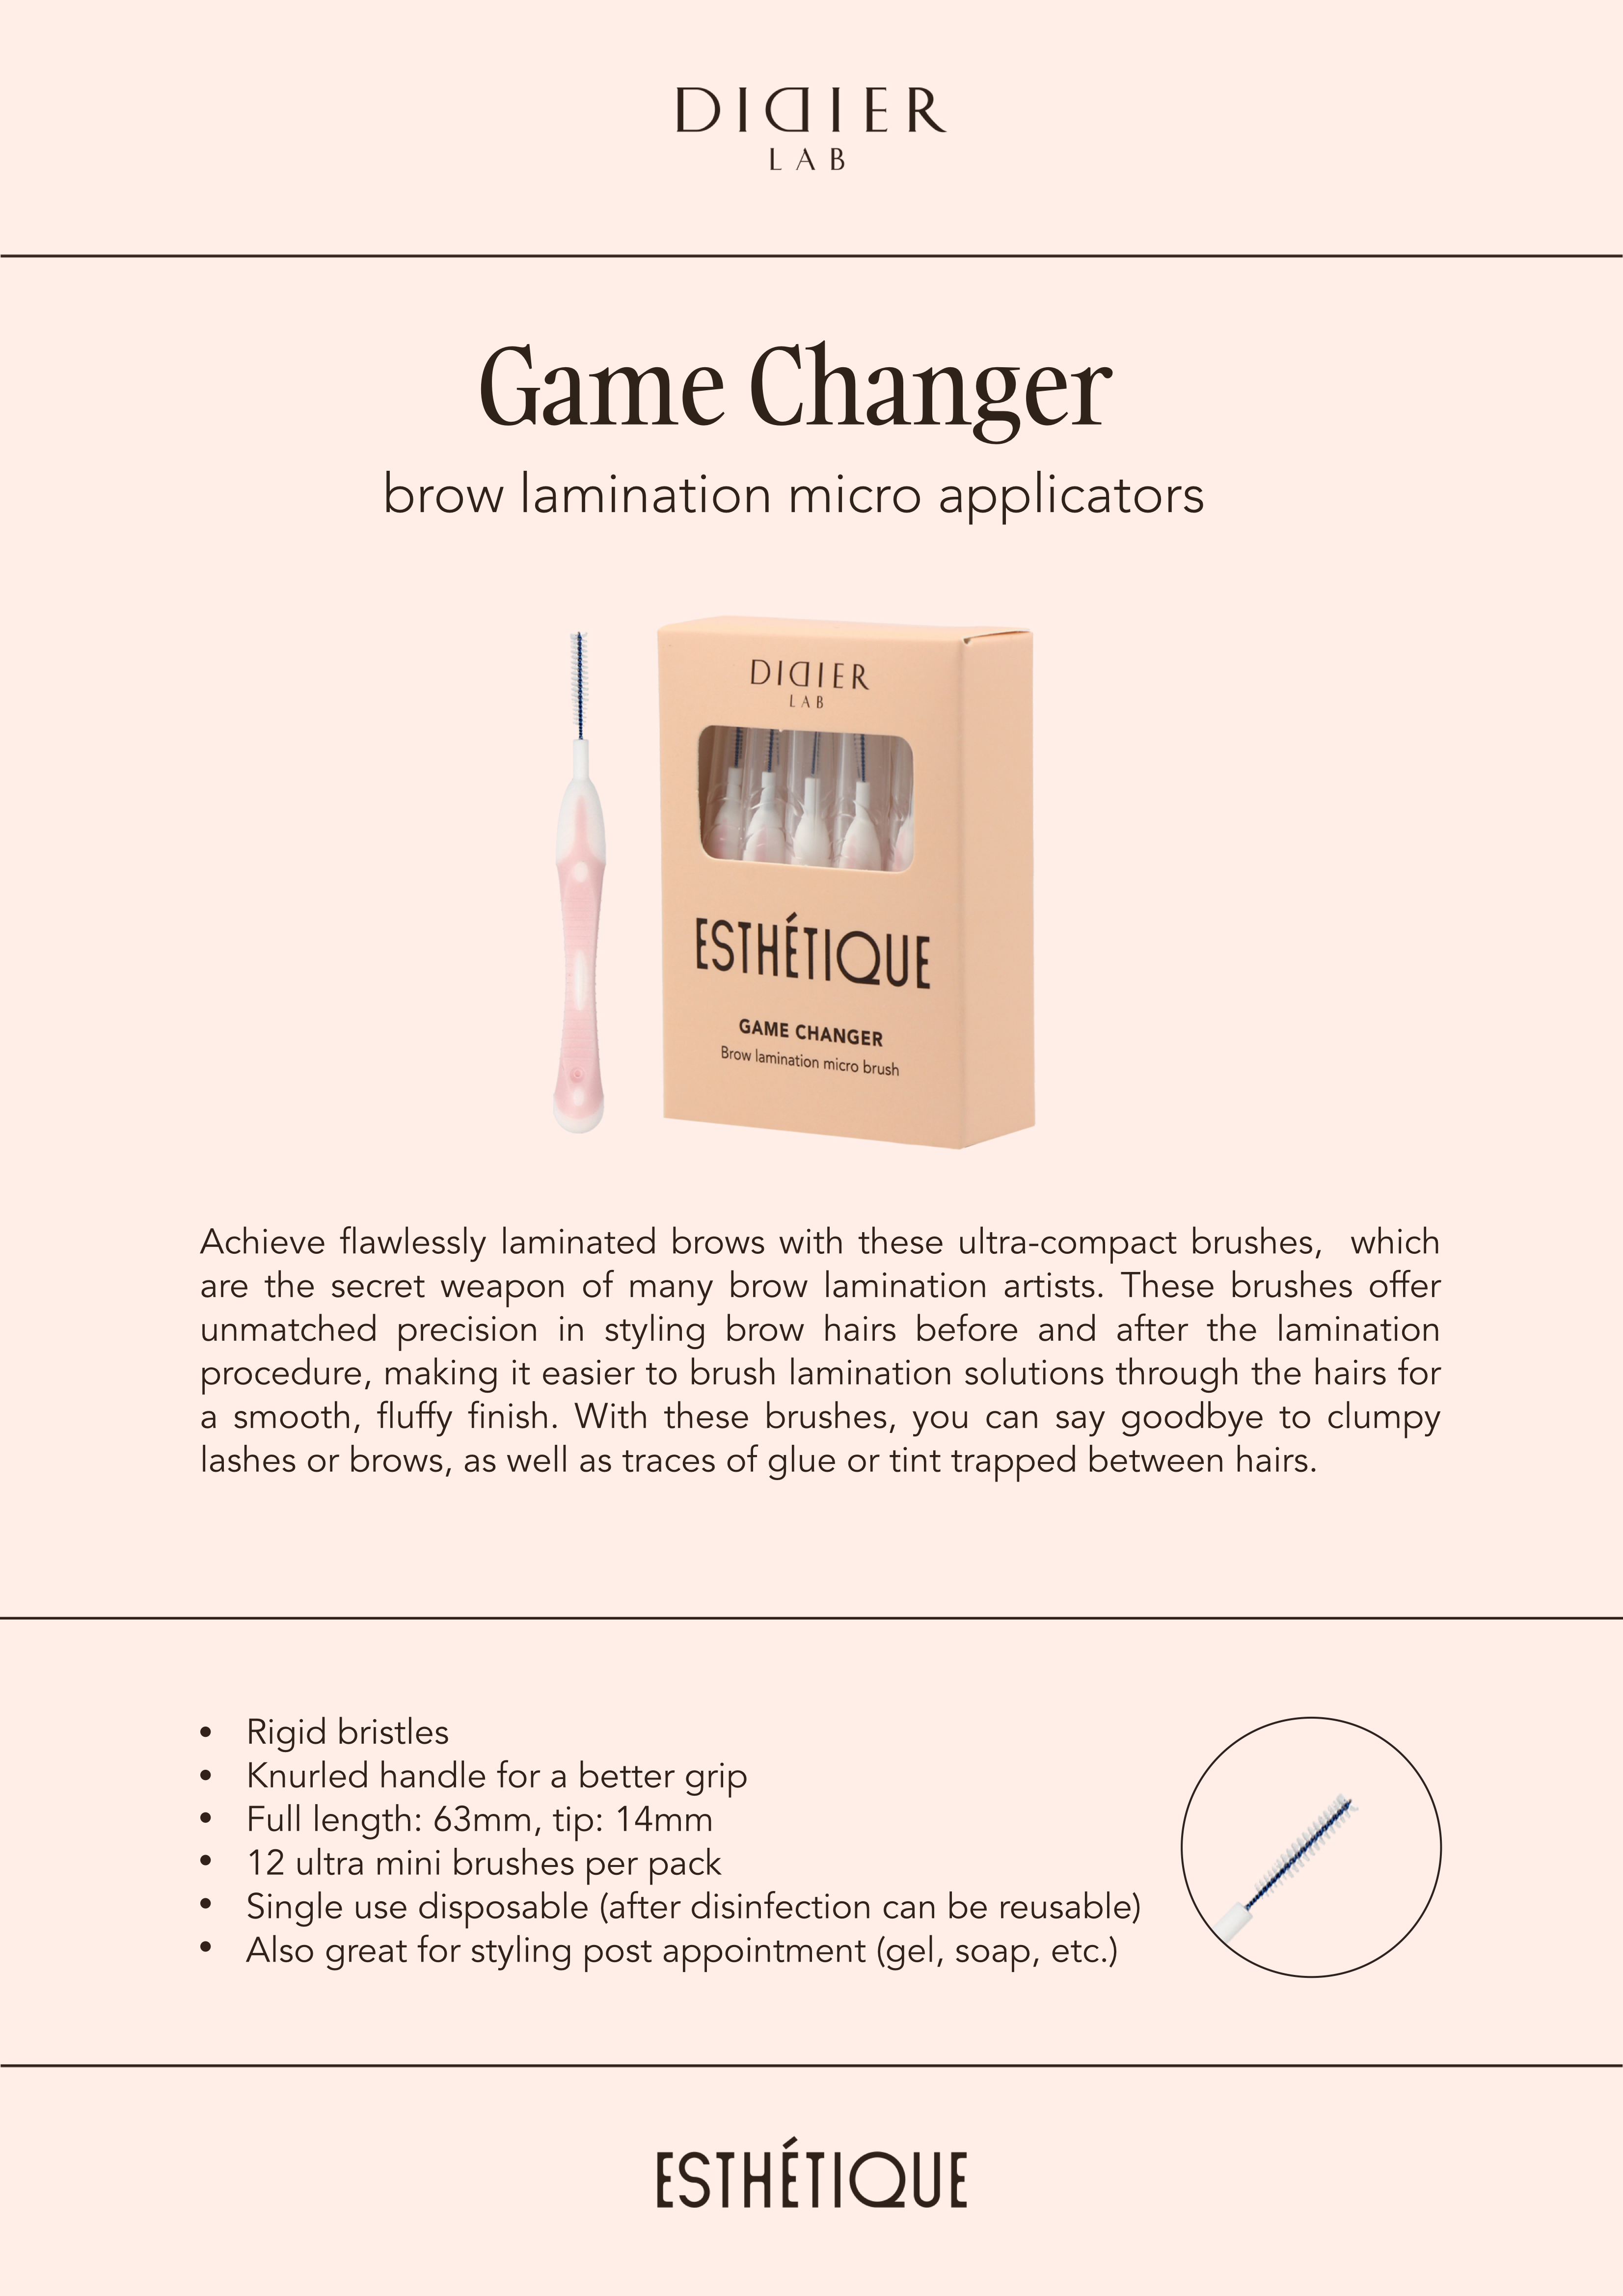 Game Changer ENG.png__PID:79115db1-4934-40d1-b3fa-7eda818a7cd5